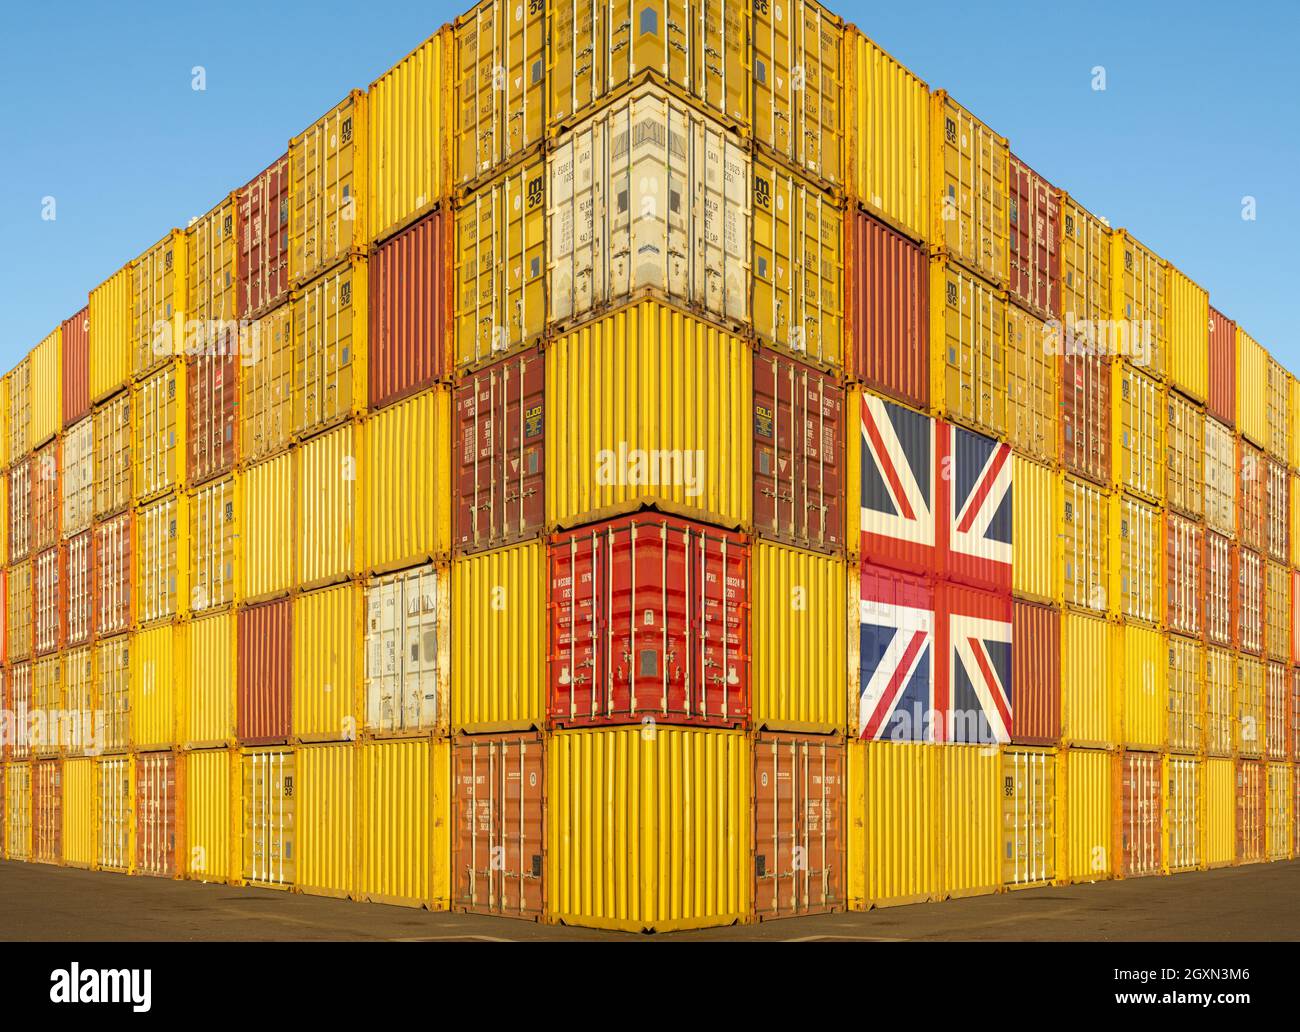 UK flag on shipping containers in docks. Post Brexit uk trade deals, container shortage, shipping costs, uk economy hgv driver shortage... concept. Stock Photo